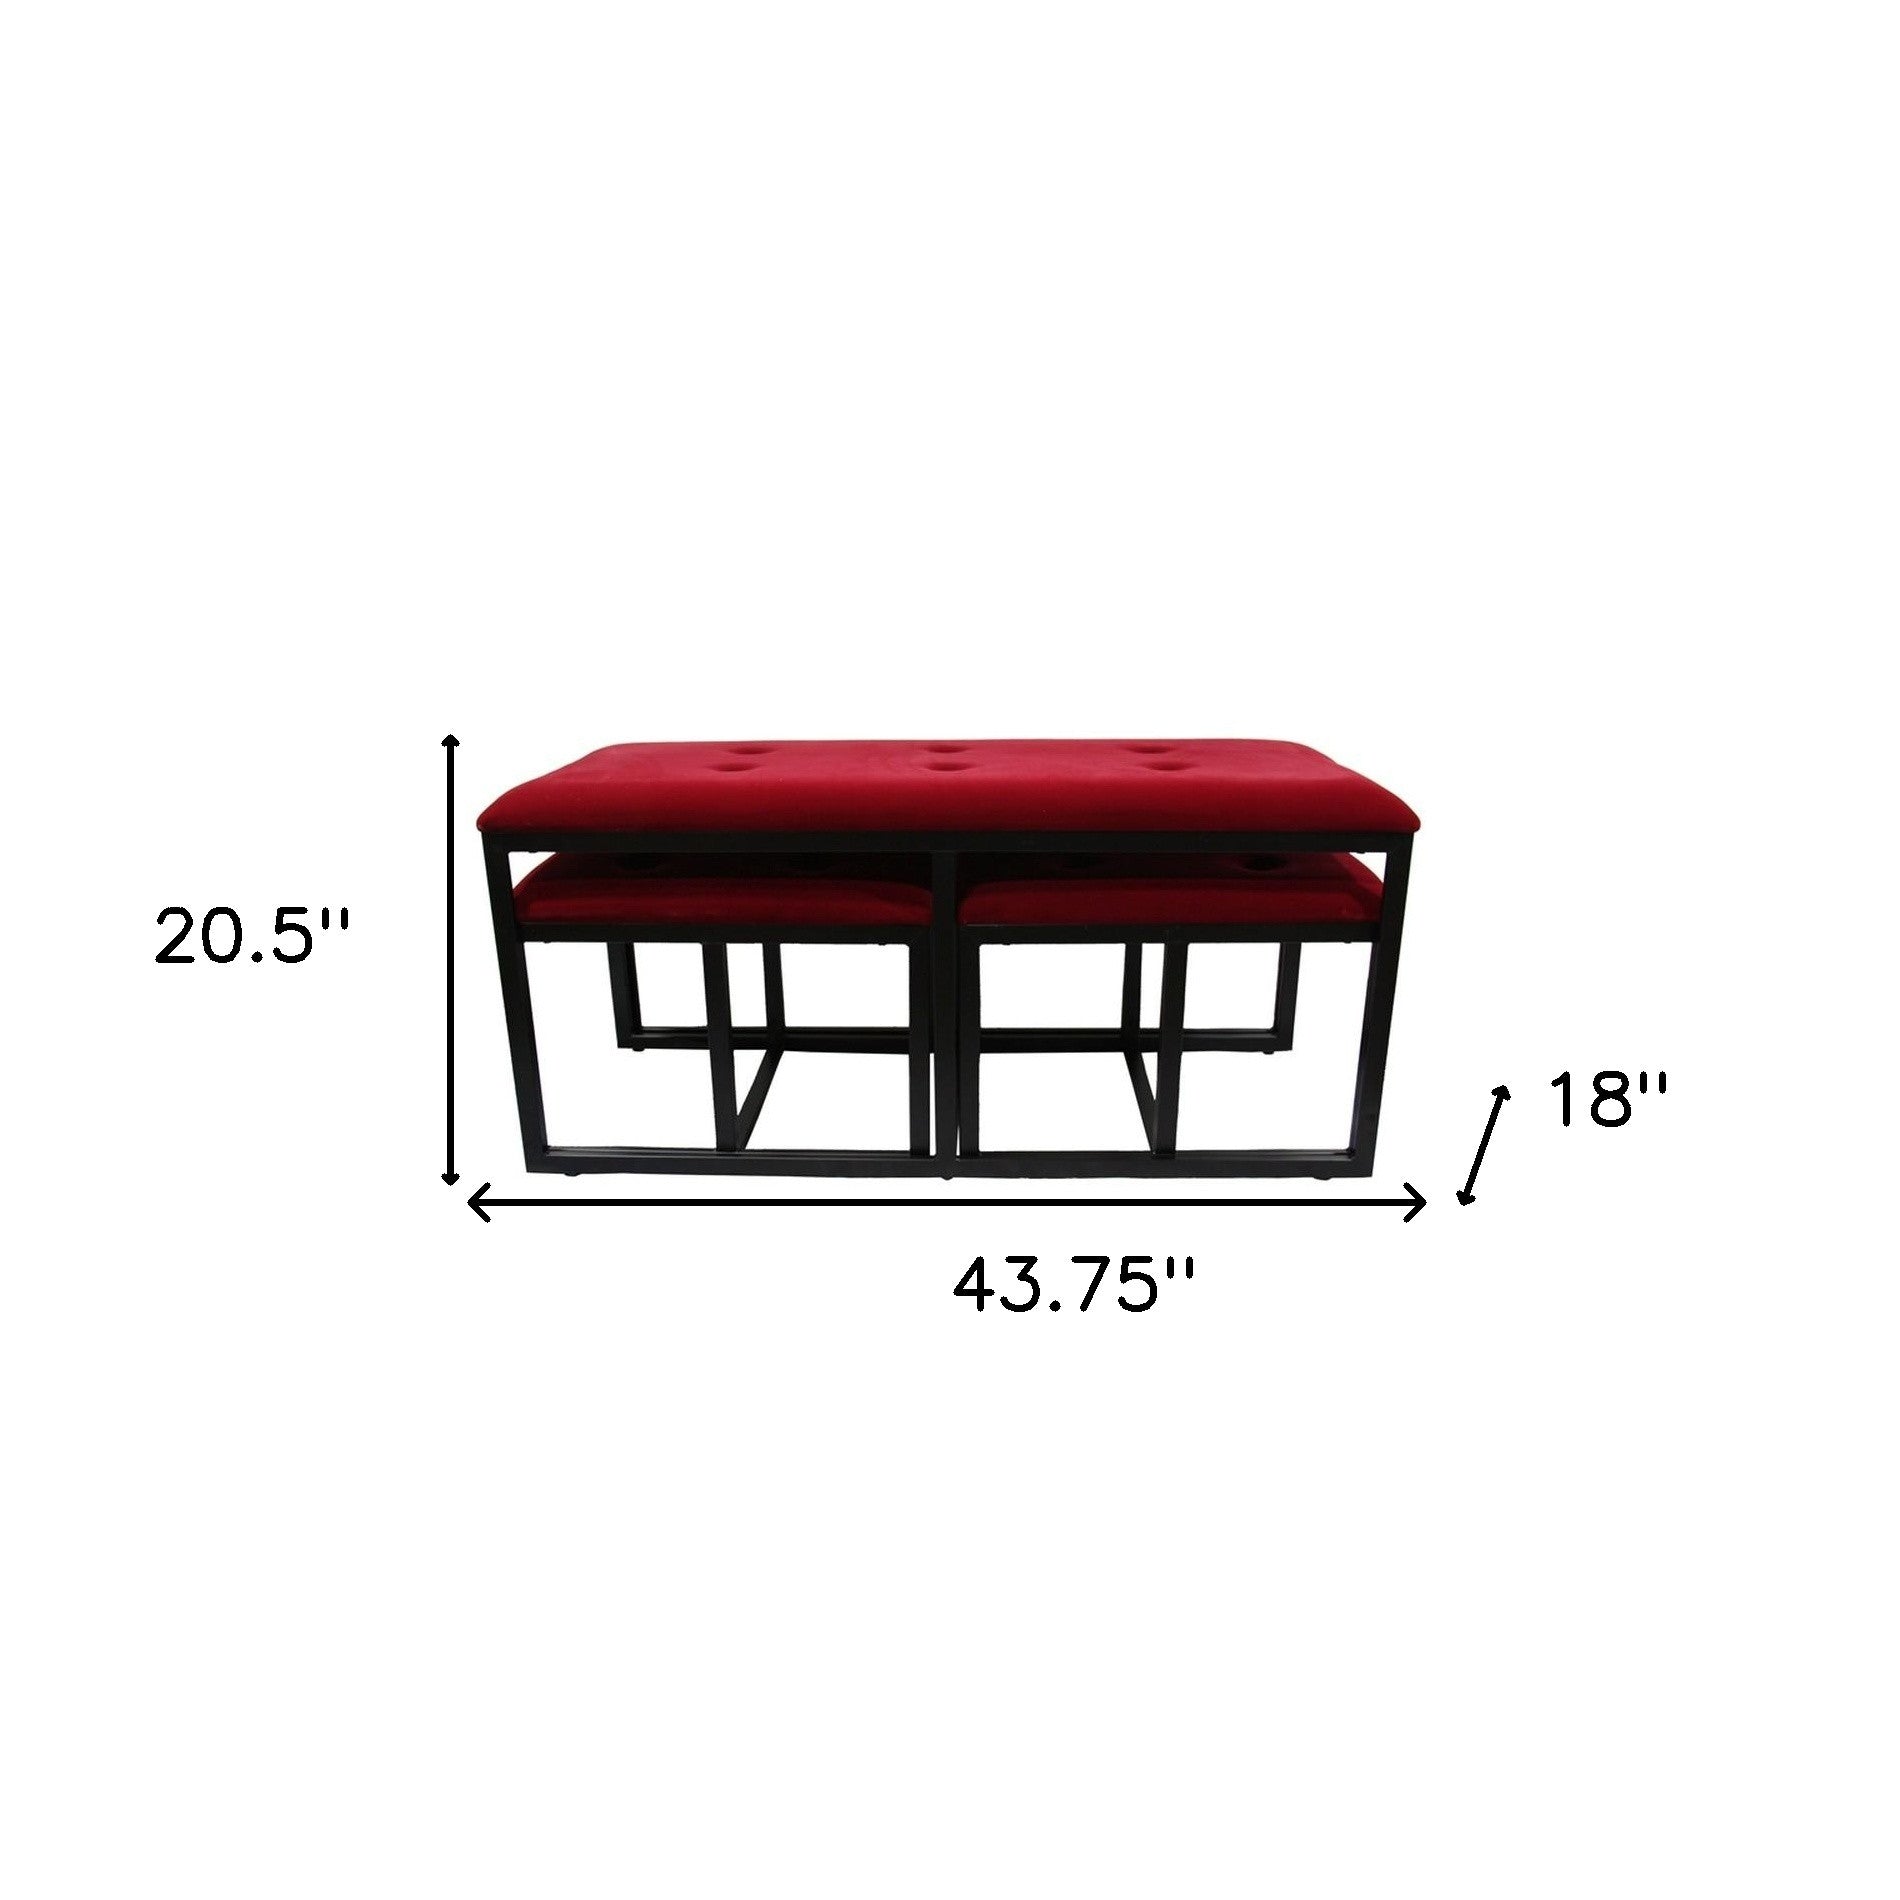 18" Red and Black Upholstered Microfiber Bench